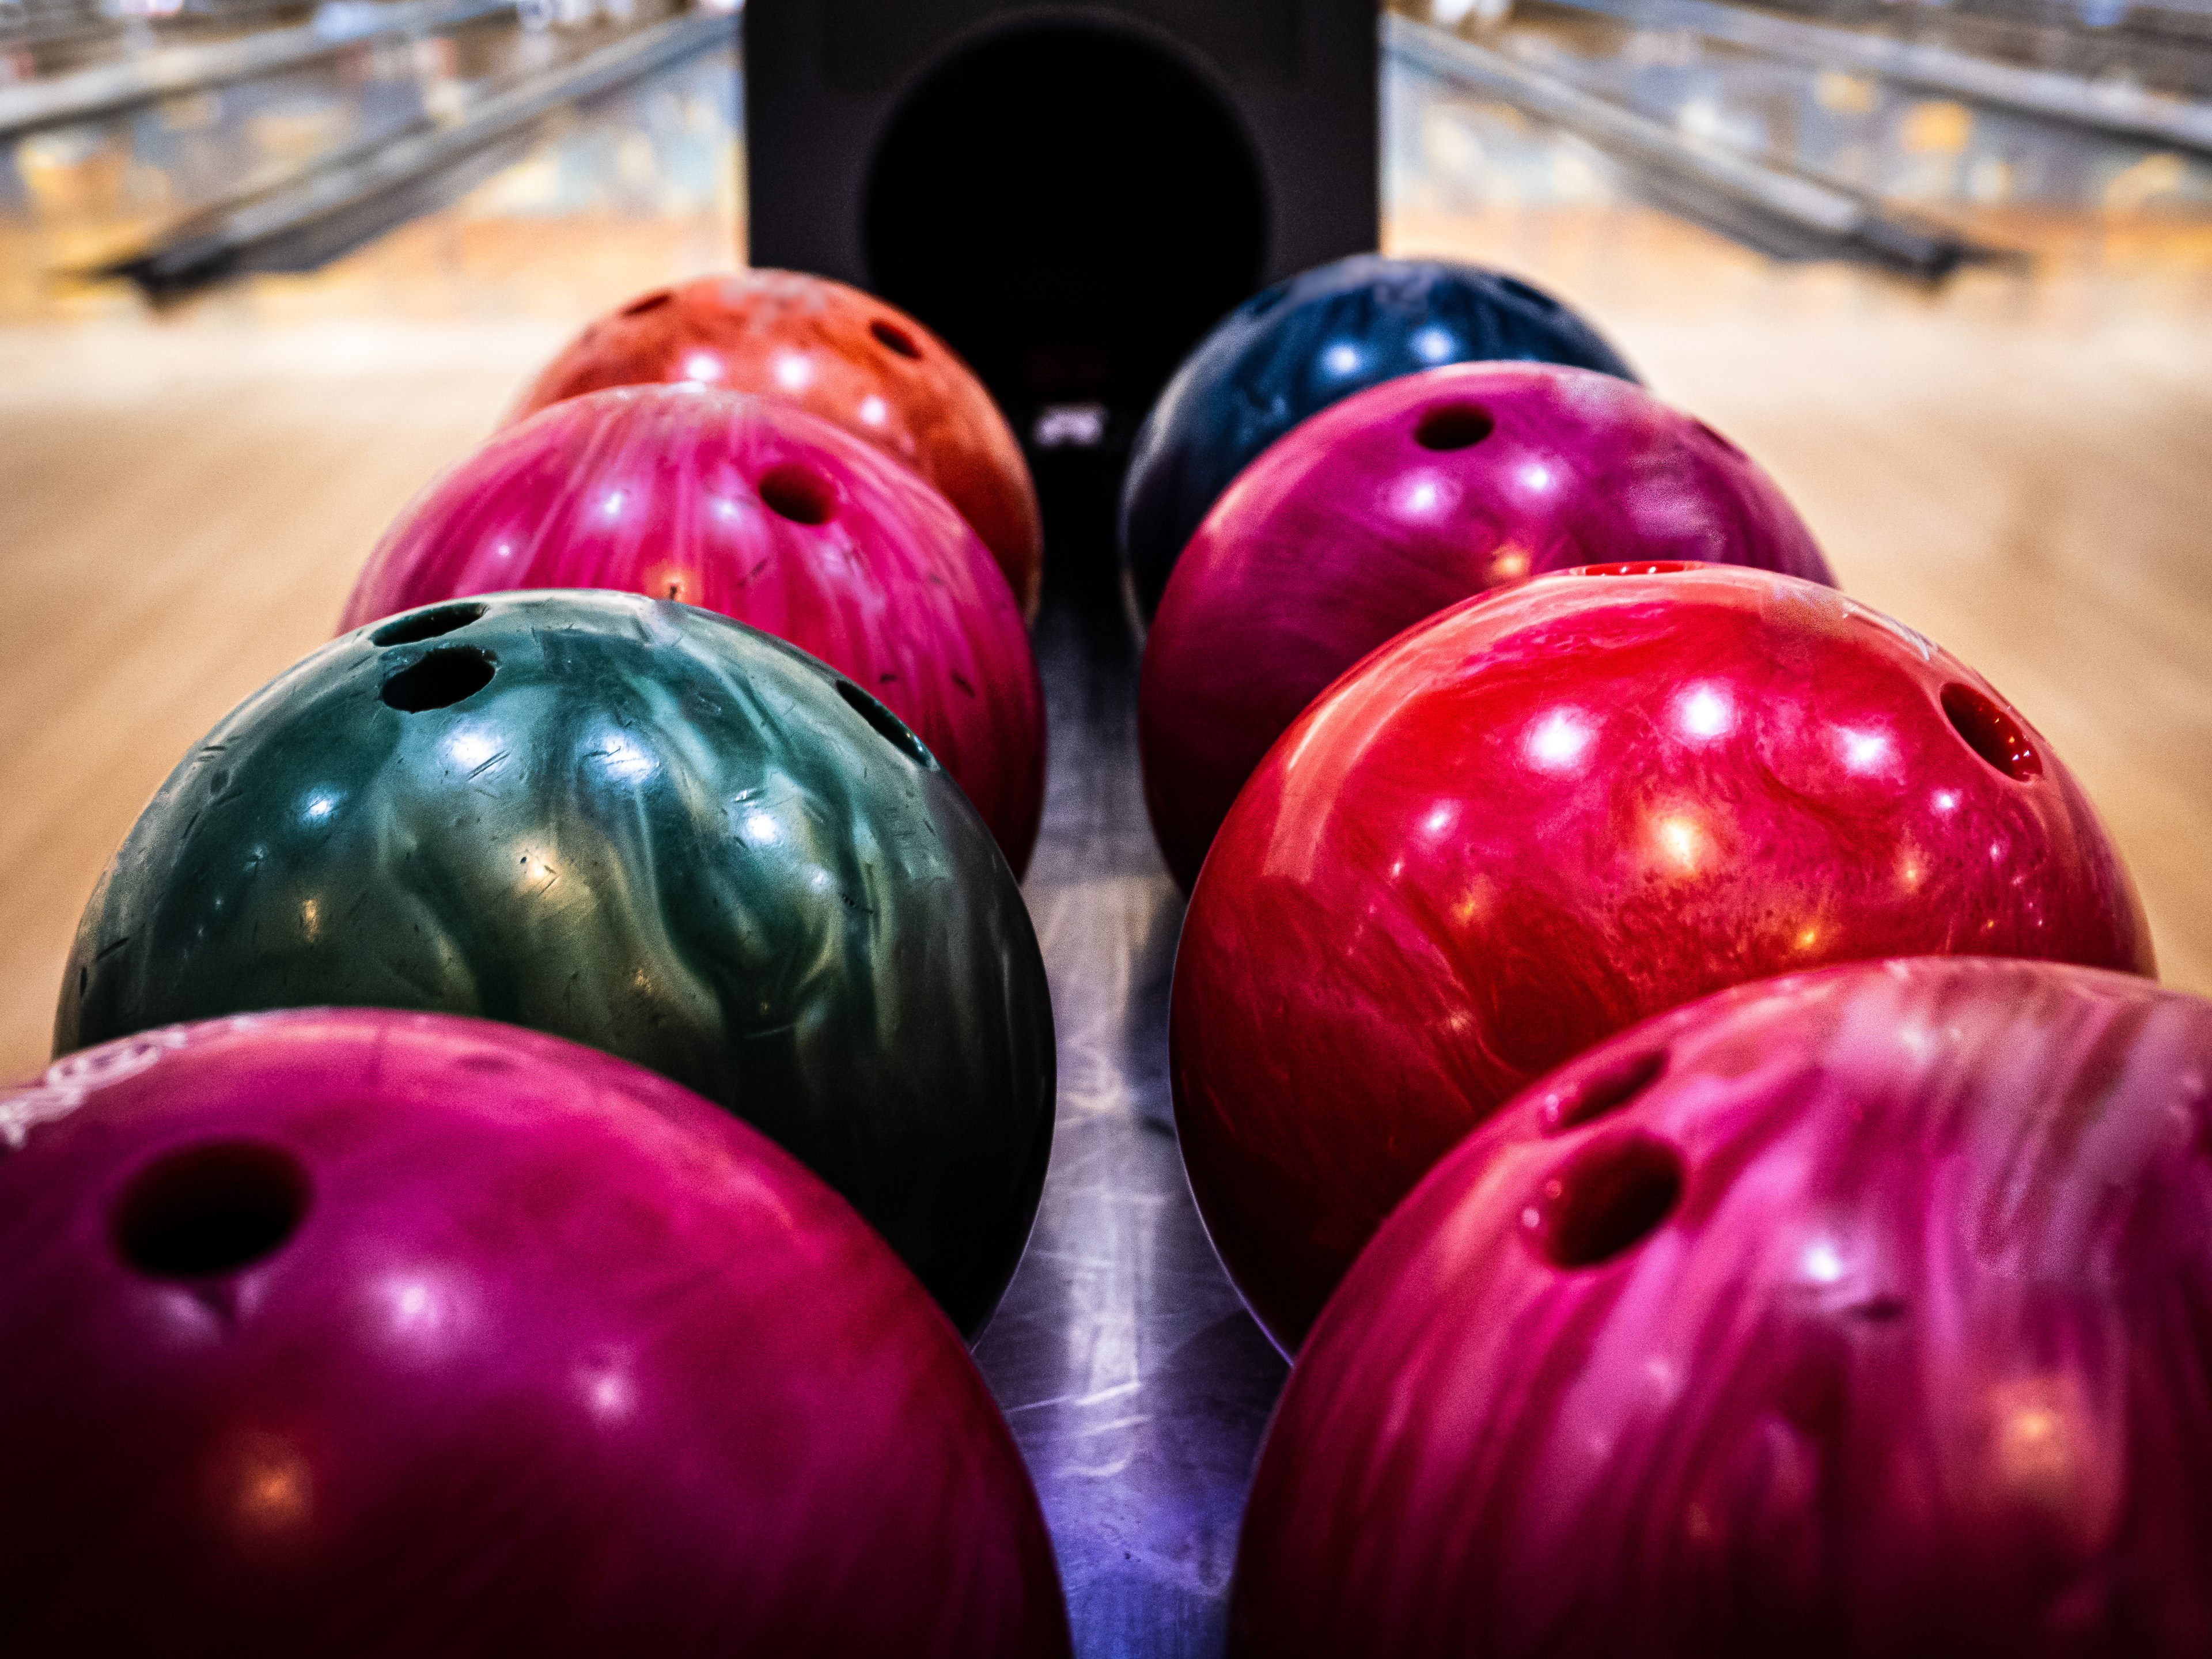 Colorful bowling balls lined up on a rack, with a bowling lane visible in the background.